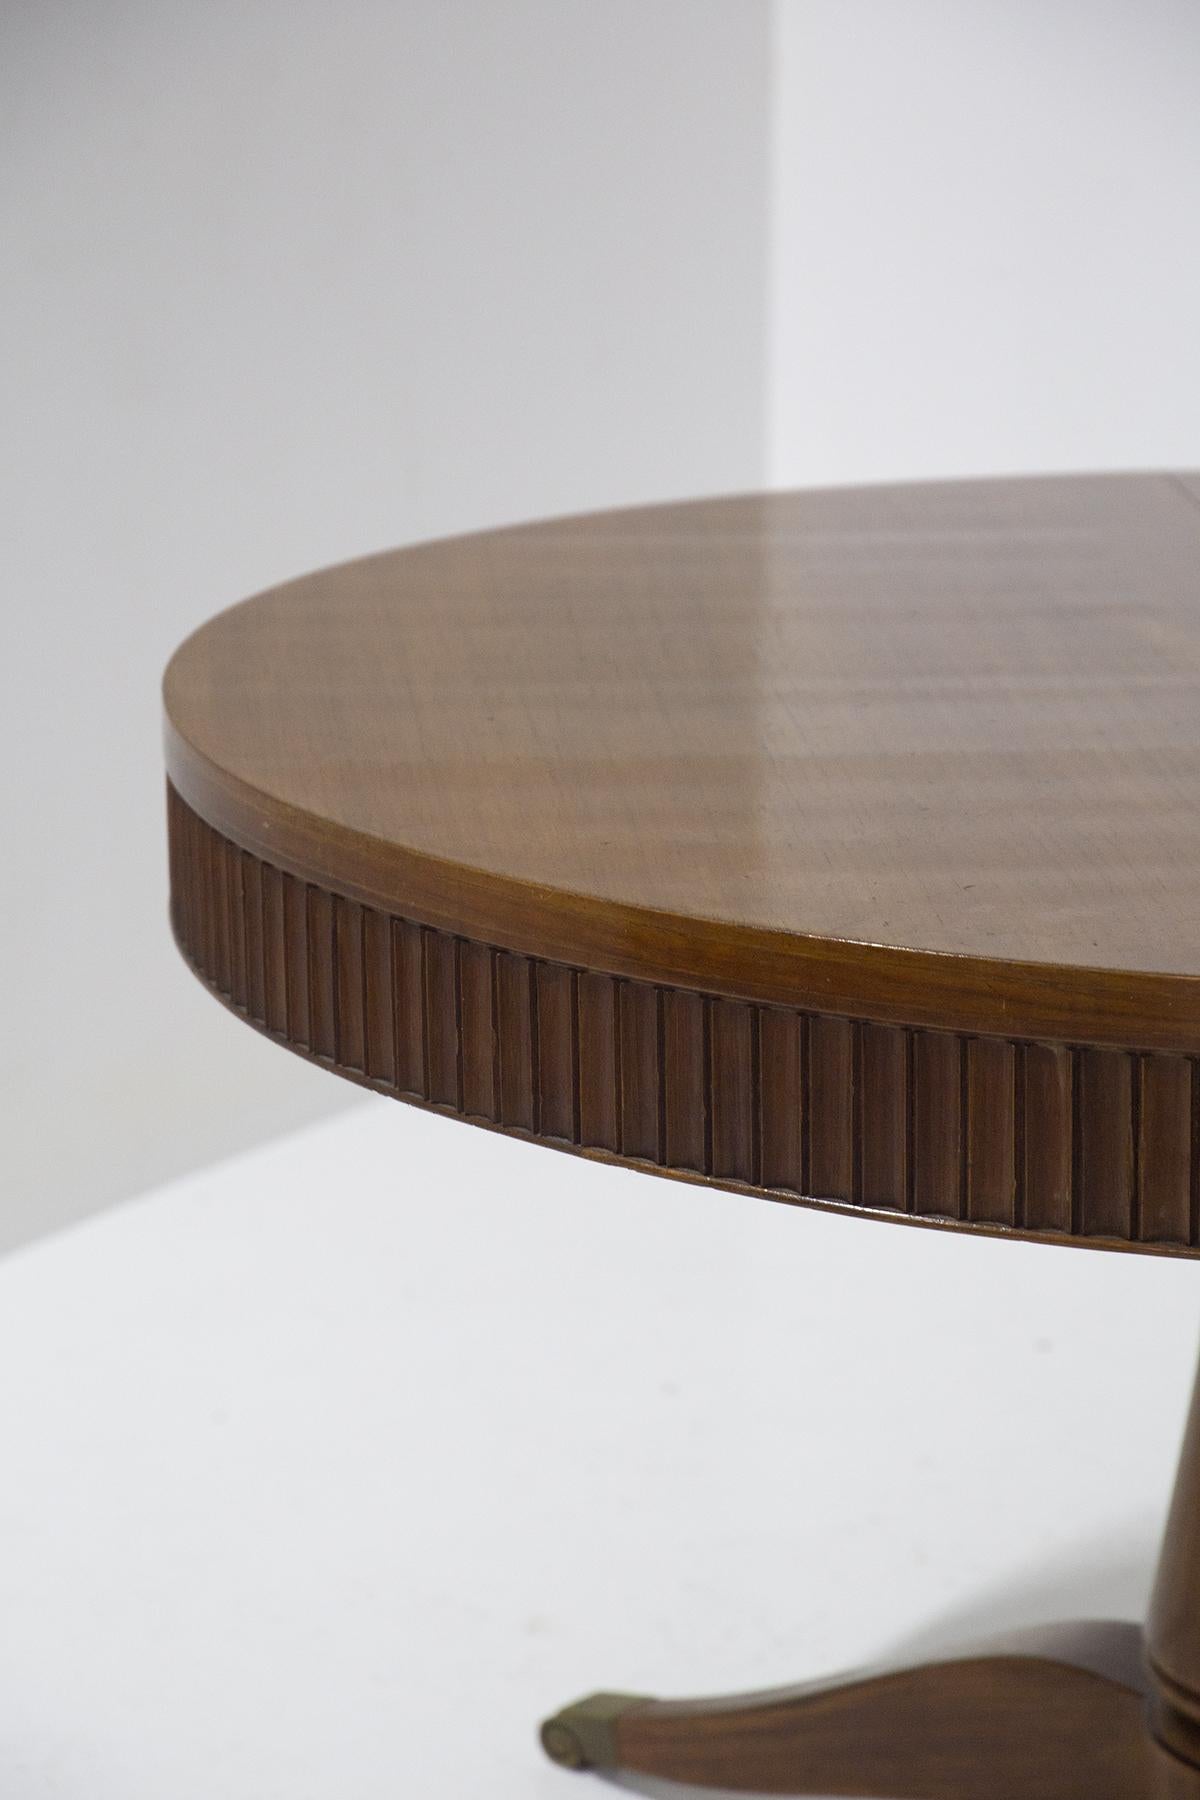 Lovely round table designed by the great designer Paolo Buffa for the fine Italian manufacture Serafino Arrighi in the 1960s.
The table is made of fine wood with excellent workmanship of the pedestal and its feet and with magnificent indentations